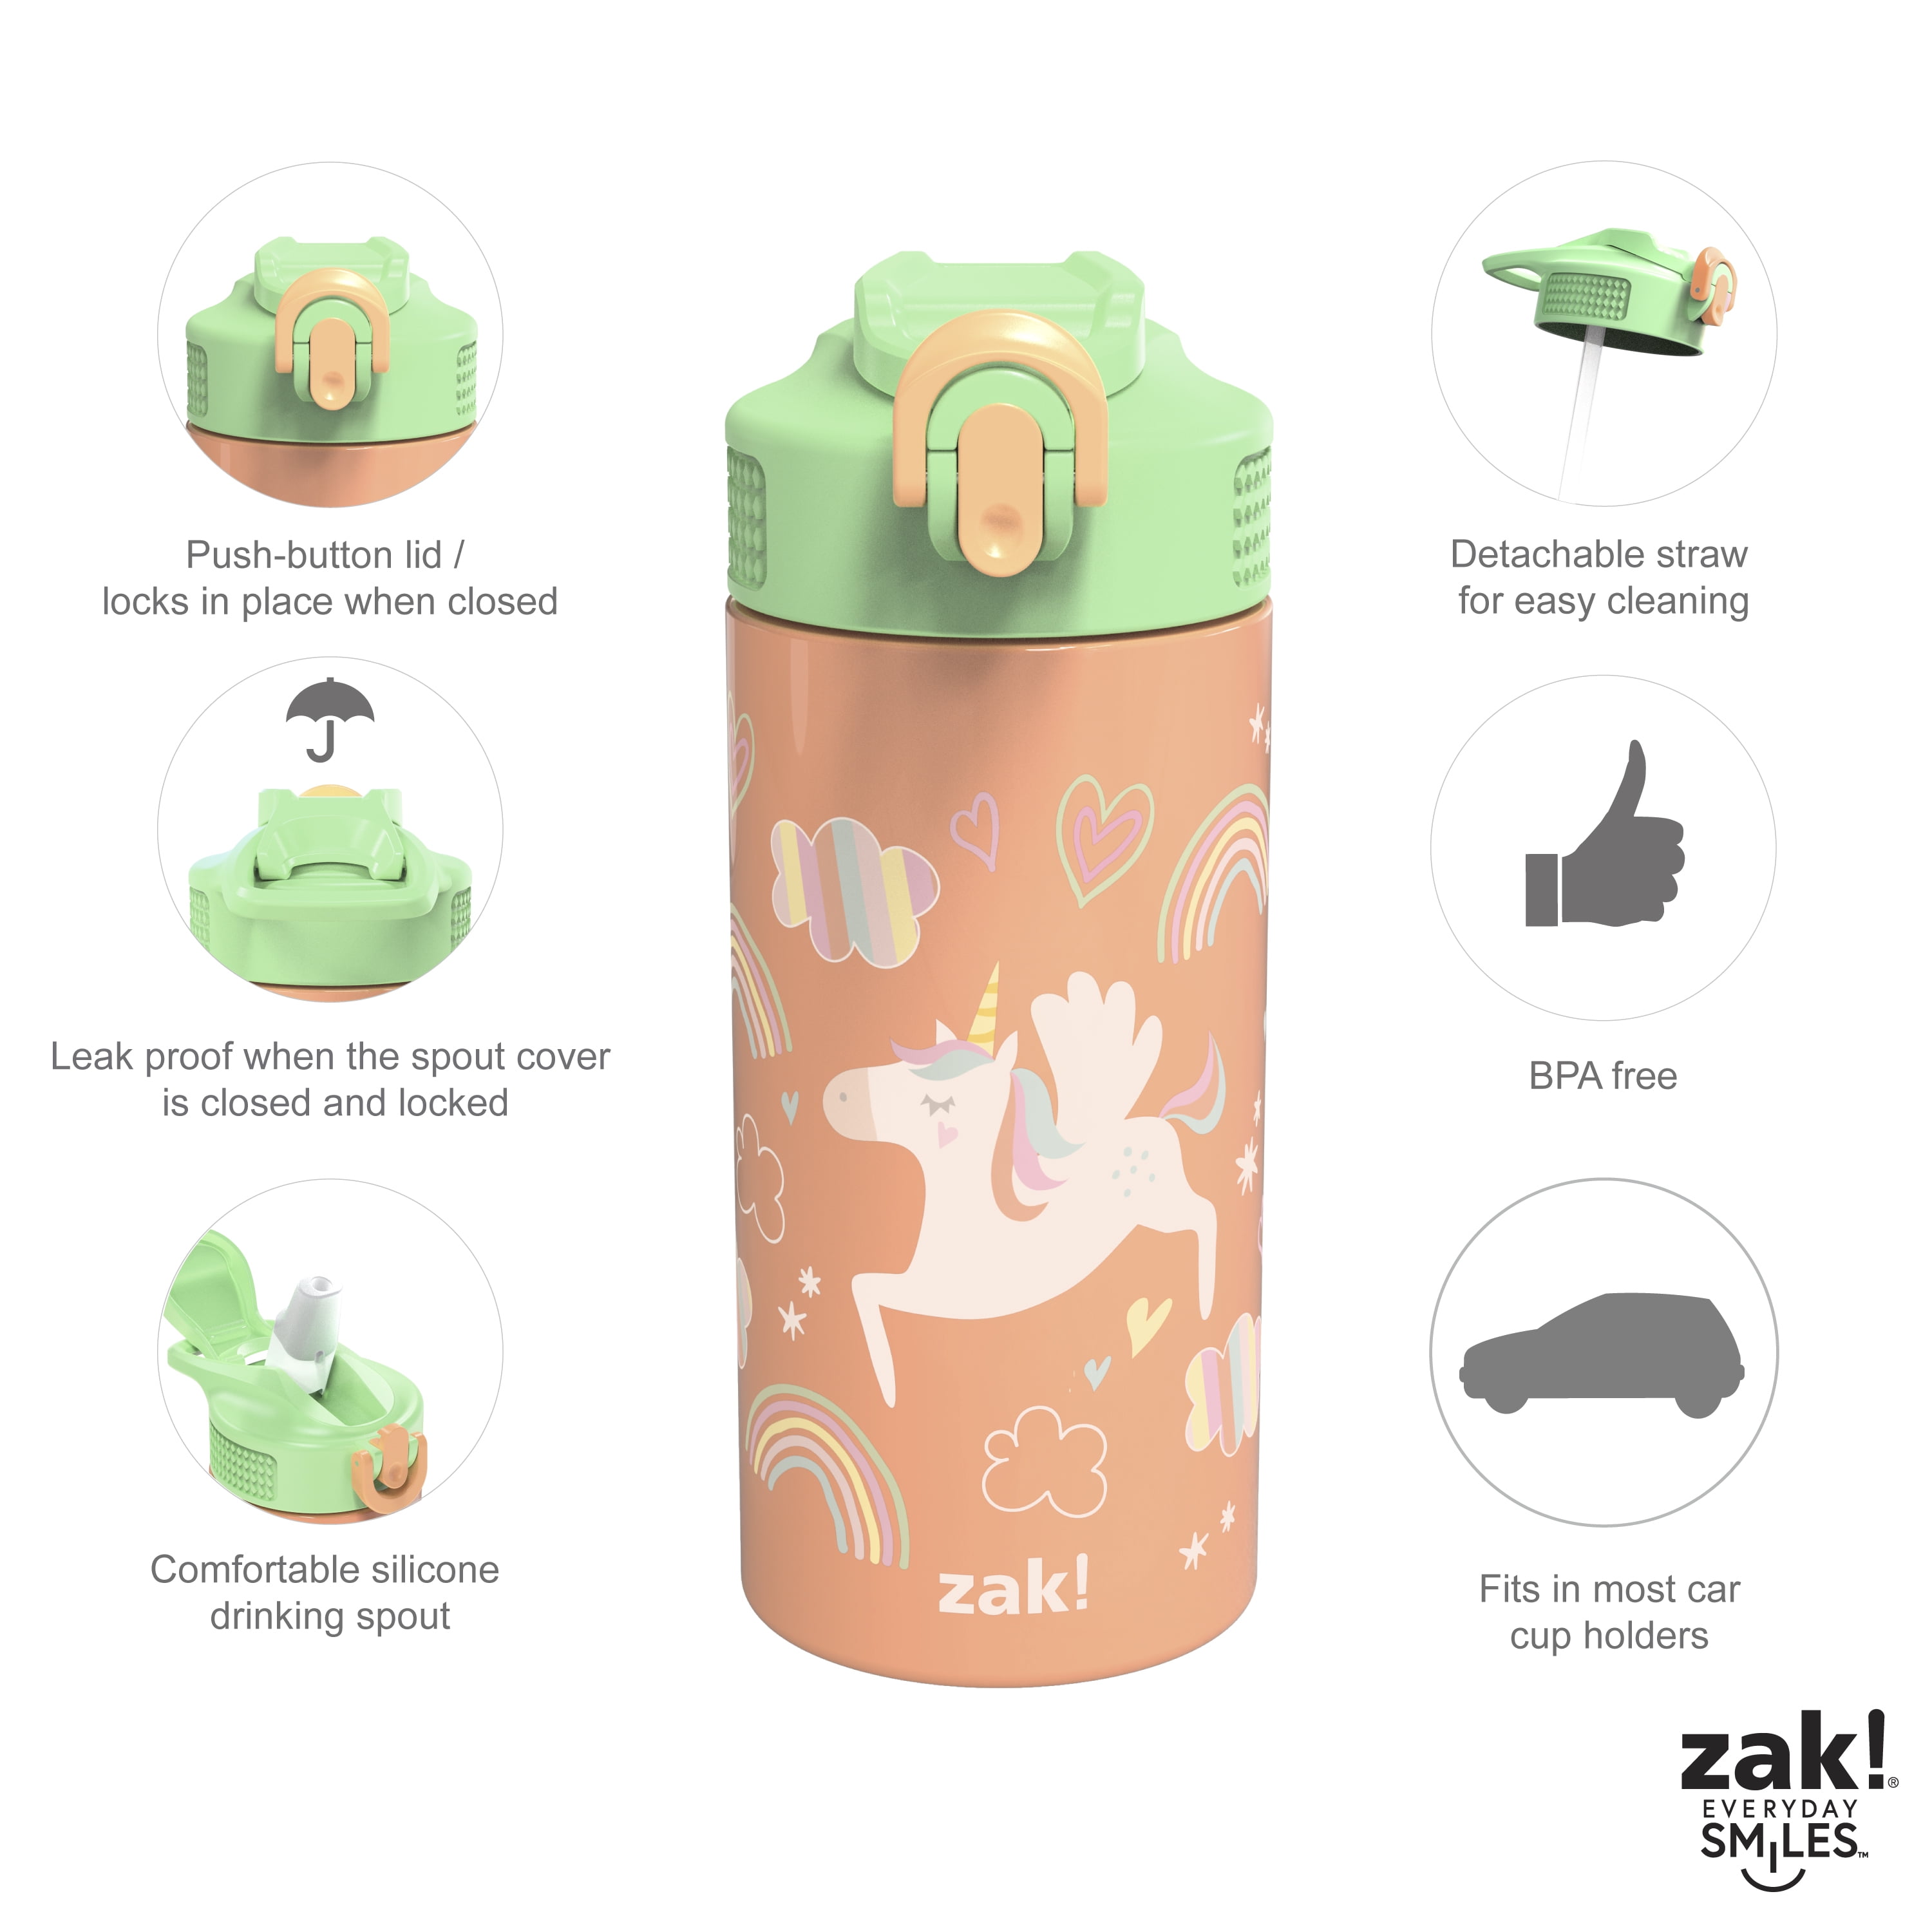 BOZ Kids Insulated Water Bottle with Straw Lid, Stainless Steel Double Wall  Water Cup-Unicorn, 1 - Kroger